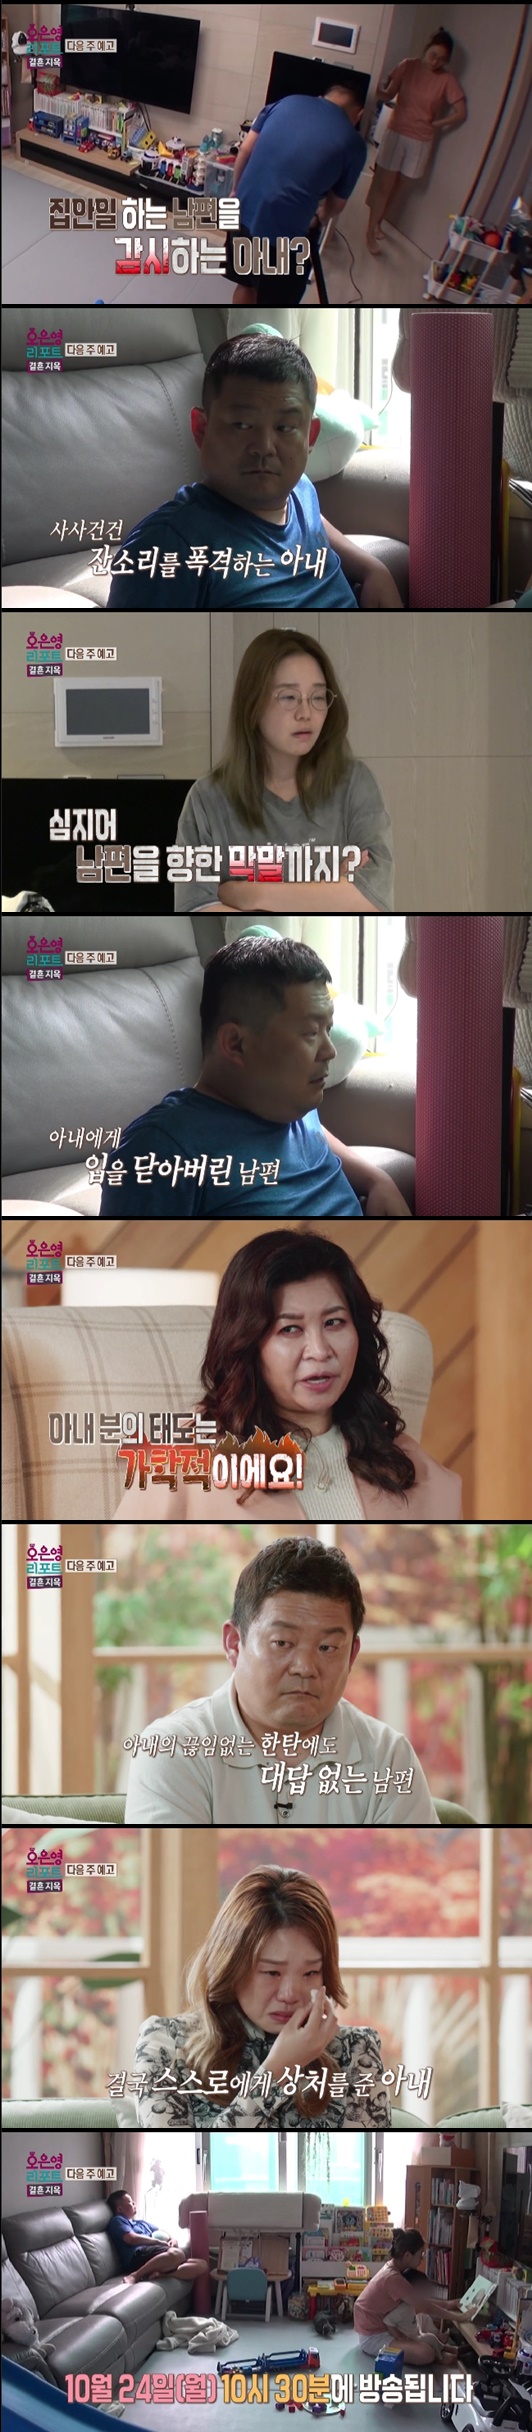 MBC Oh Eun Young Report Marriage Hell, which airs at 10:30 pm on the 24th, features Bose Corporations wife, who points out what Husband is doing, and Bose Corporation Husband, who responds silently to his wifes words.They met for the first time in the snowboard club in the fifth year of marriage and married to Husbands passionate courtship.Marriage life, which I thought would be happy, is for a while, and the couple asks Oh Eun Young Doctorate for help, saying that every moment of everyday life is a conflict, such as eating rice, cleaning and washing dishes.On this day, Husband was a dual-income couple, but he took care of all the housework, including cooking, washing dishes, washing clothes, and collecting separately.My wife watched Husband doing housework with her eyes, and when she found an unmatched sock, she said, Is this normal? And poured Bakumatsu on Husband.My wife, who was preparing a roasted beef for dinner, made a meal for herself and her child and ate only with her child without saying a word to Husband.Husband, who saw this, could not hide his sadness about his wife, saying that he was not a member of this family.Husband, who went out of the house, was unhappy with the MCs watching the cup noodles and instant kimbap at a nearby convenience store.Oh Eun Young Doctorate said, My wifes attitude toward Husband seems sadistic.He said that his wifes attitude would include multiple hearings.At the end of the Doctorate, my wife sympathized and confessed that the marriage life was painful enough to tell Husband that I wanted to avenge the hard feelings I felt. Why did my wife hate Husband so much?My wife brought up the onion curry case, saying that Husband did not think of herself as a family. During pregnancy, when it was hard to even smell onions, Husband made her a curry with only onions.Even when I was sick, I went to drink or my wifes family had a car accident, and even humming and shoulder dancing, I doubted that Husband was  ⁇ Bereavement ⁇ .My wife added that she had to choose Husband and punish herself for marrying her. She added that she was hitting her cheek and hurting herself.MCs could not hide their wonder in the completely different appearance of Husband, which seemed to be just as good and good.Oh Eun Young Doctorate, who listened to the story of the two people calmly, surprised everyone by diagnosing that this behavior of  ⁇  Husband is due to the lack of Brain function, even though the spouse does not hurt the opponent because it is good.Photograph: MBC